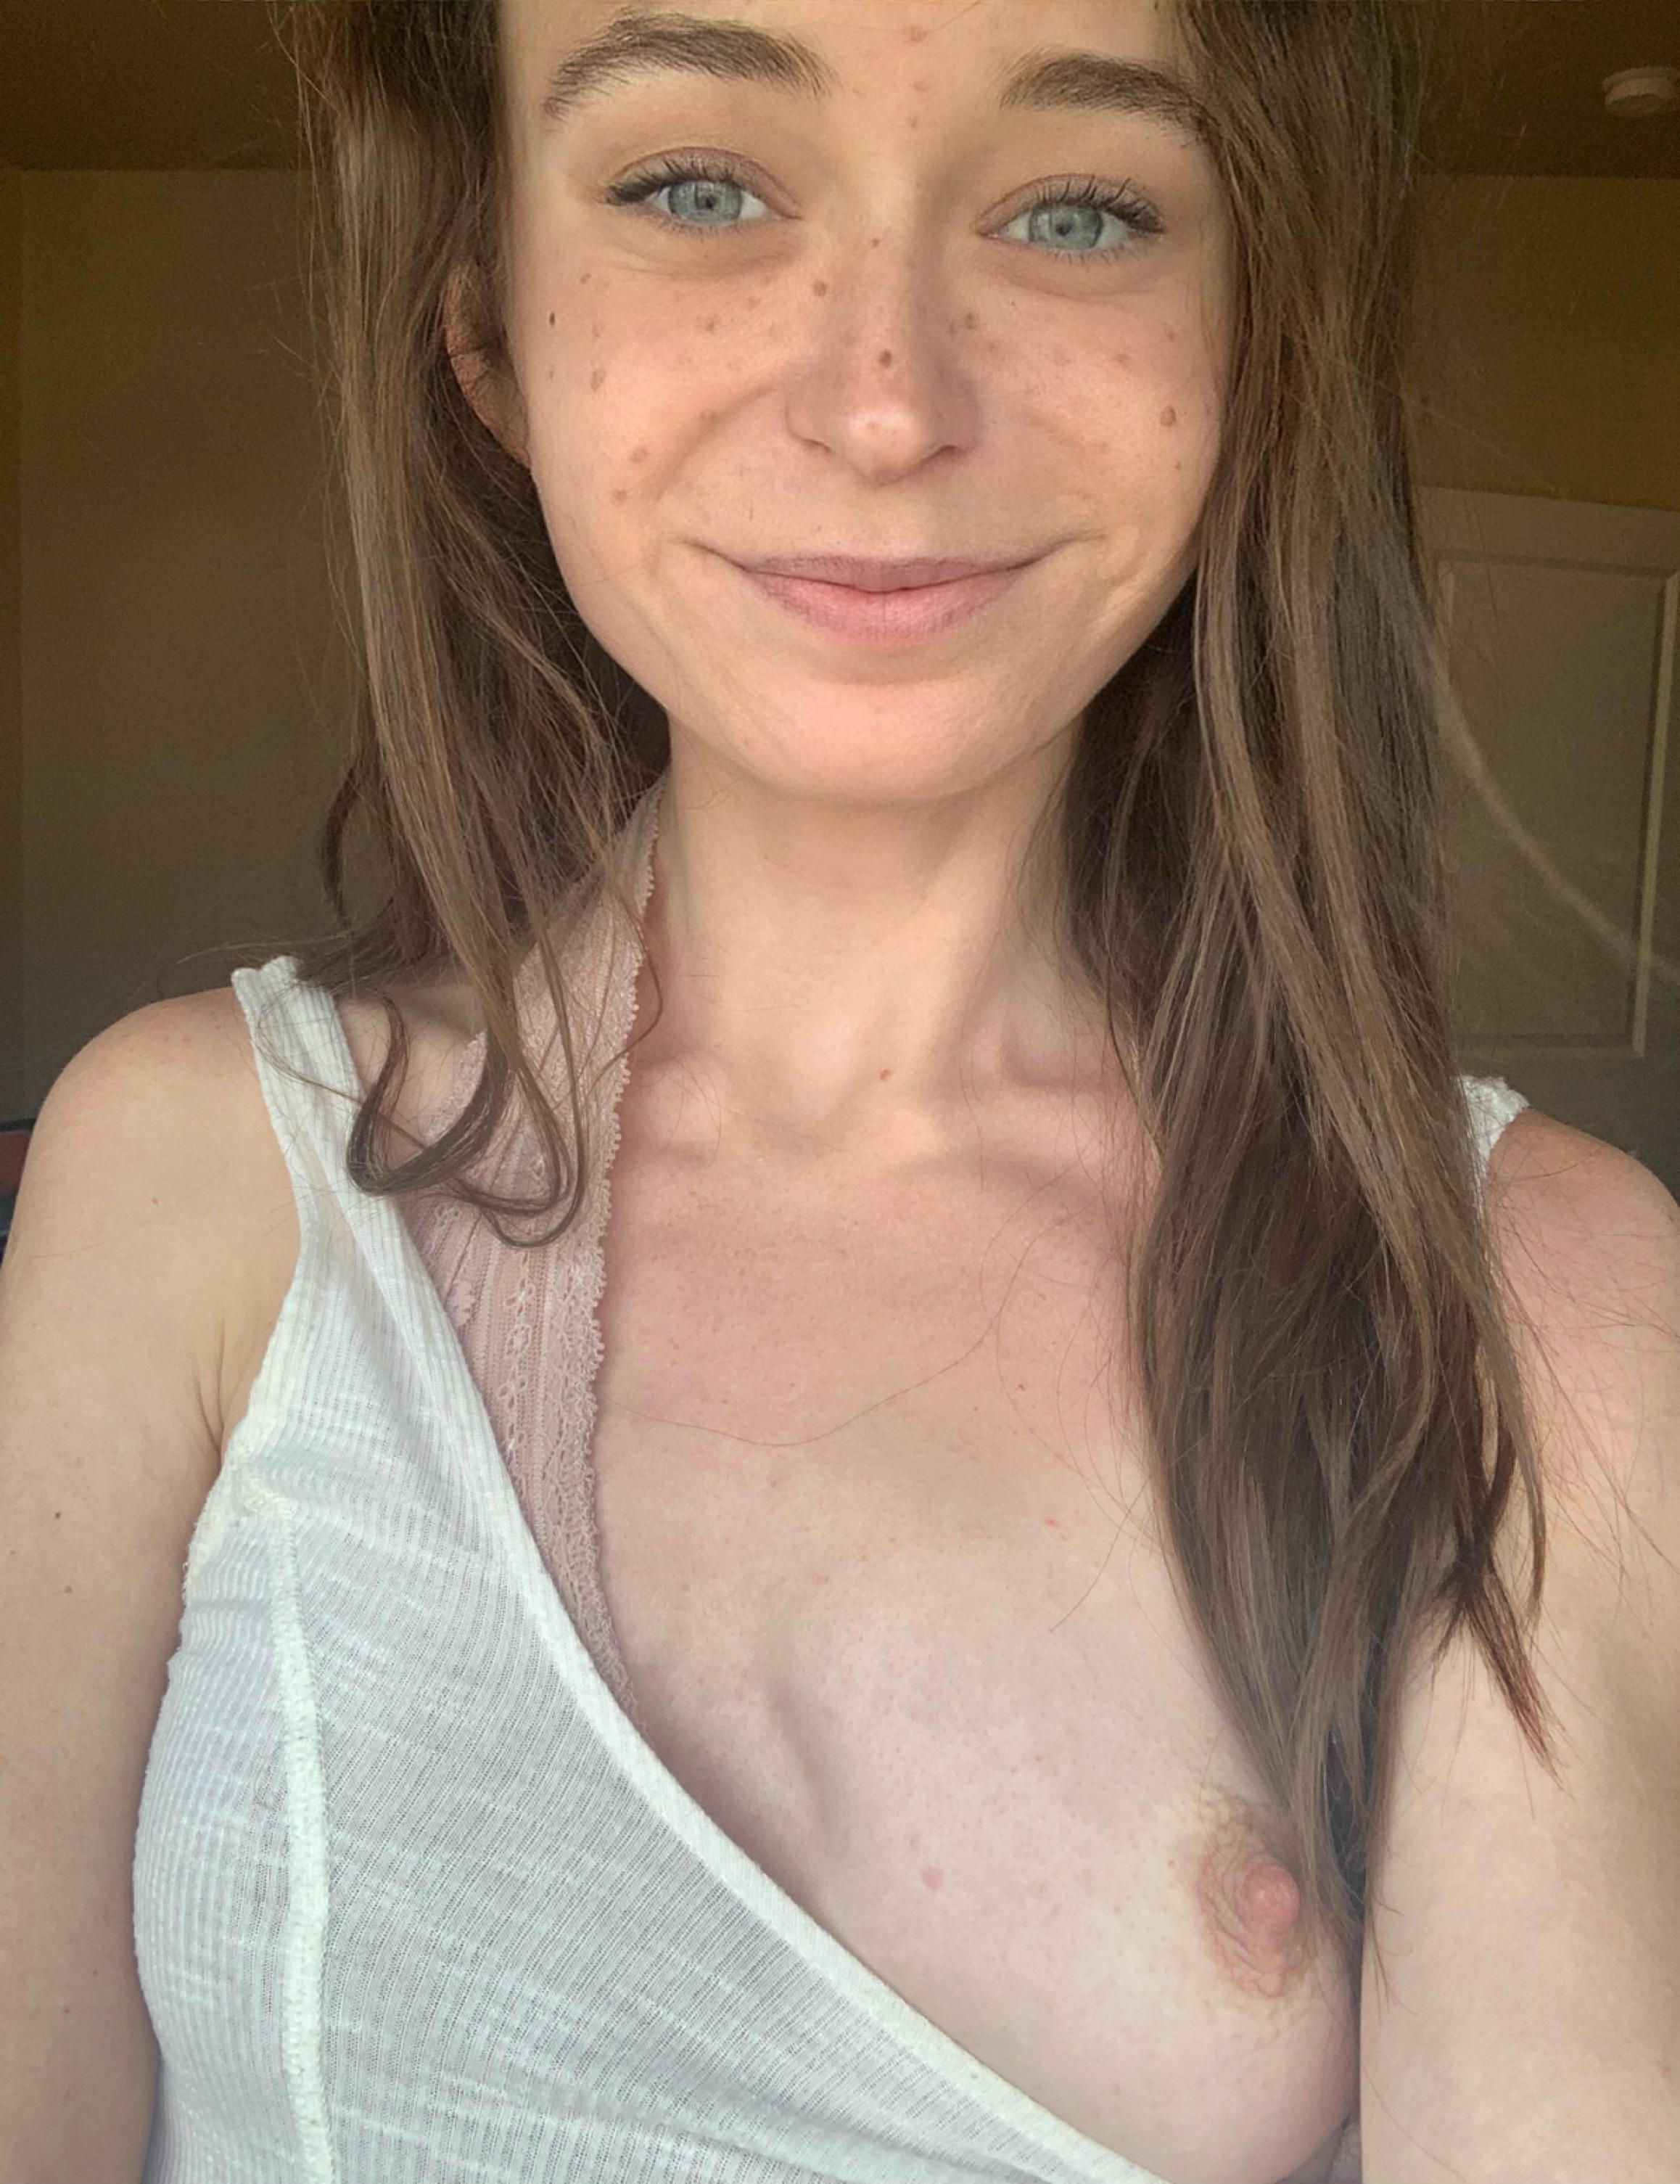 Would you fuck a girl with freckles? pic